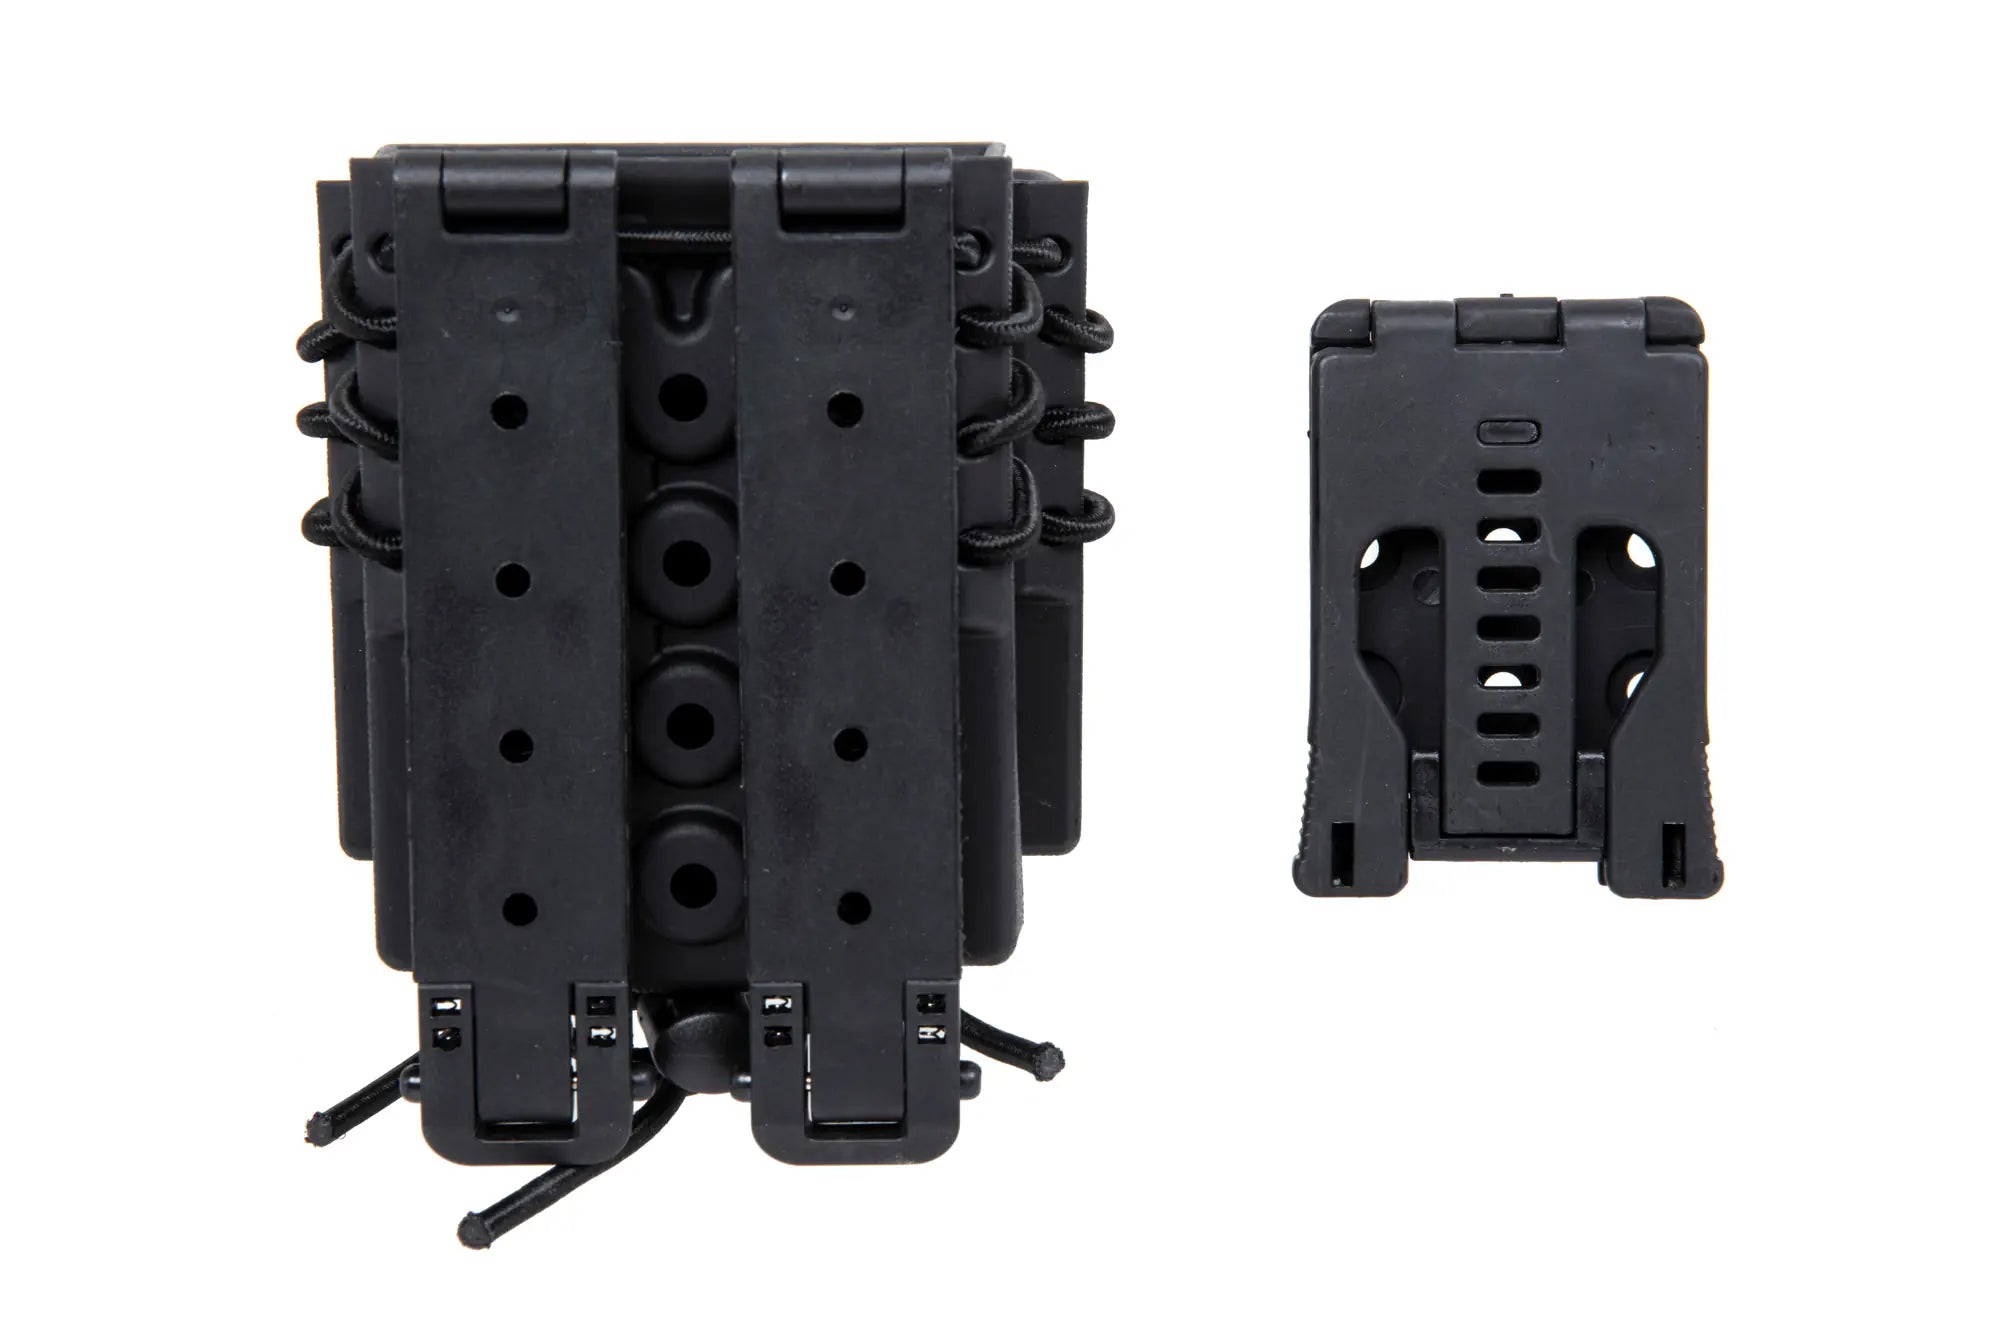 Carrier for 2 9mm magazines and an M4/M16 magazine Wosport Urban Assault Quick Pull Black-1